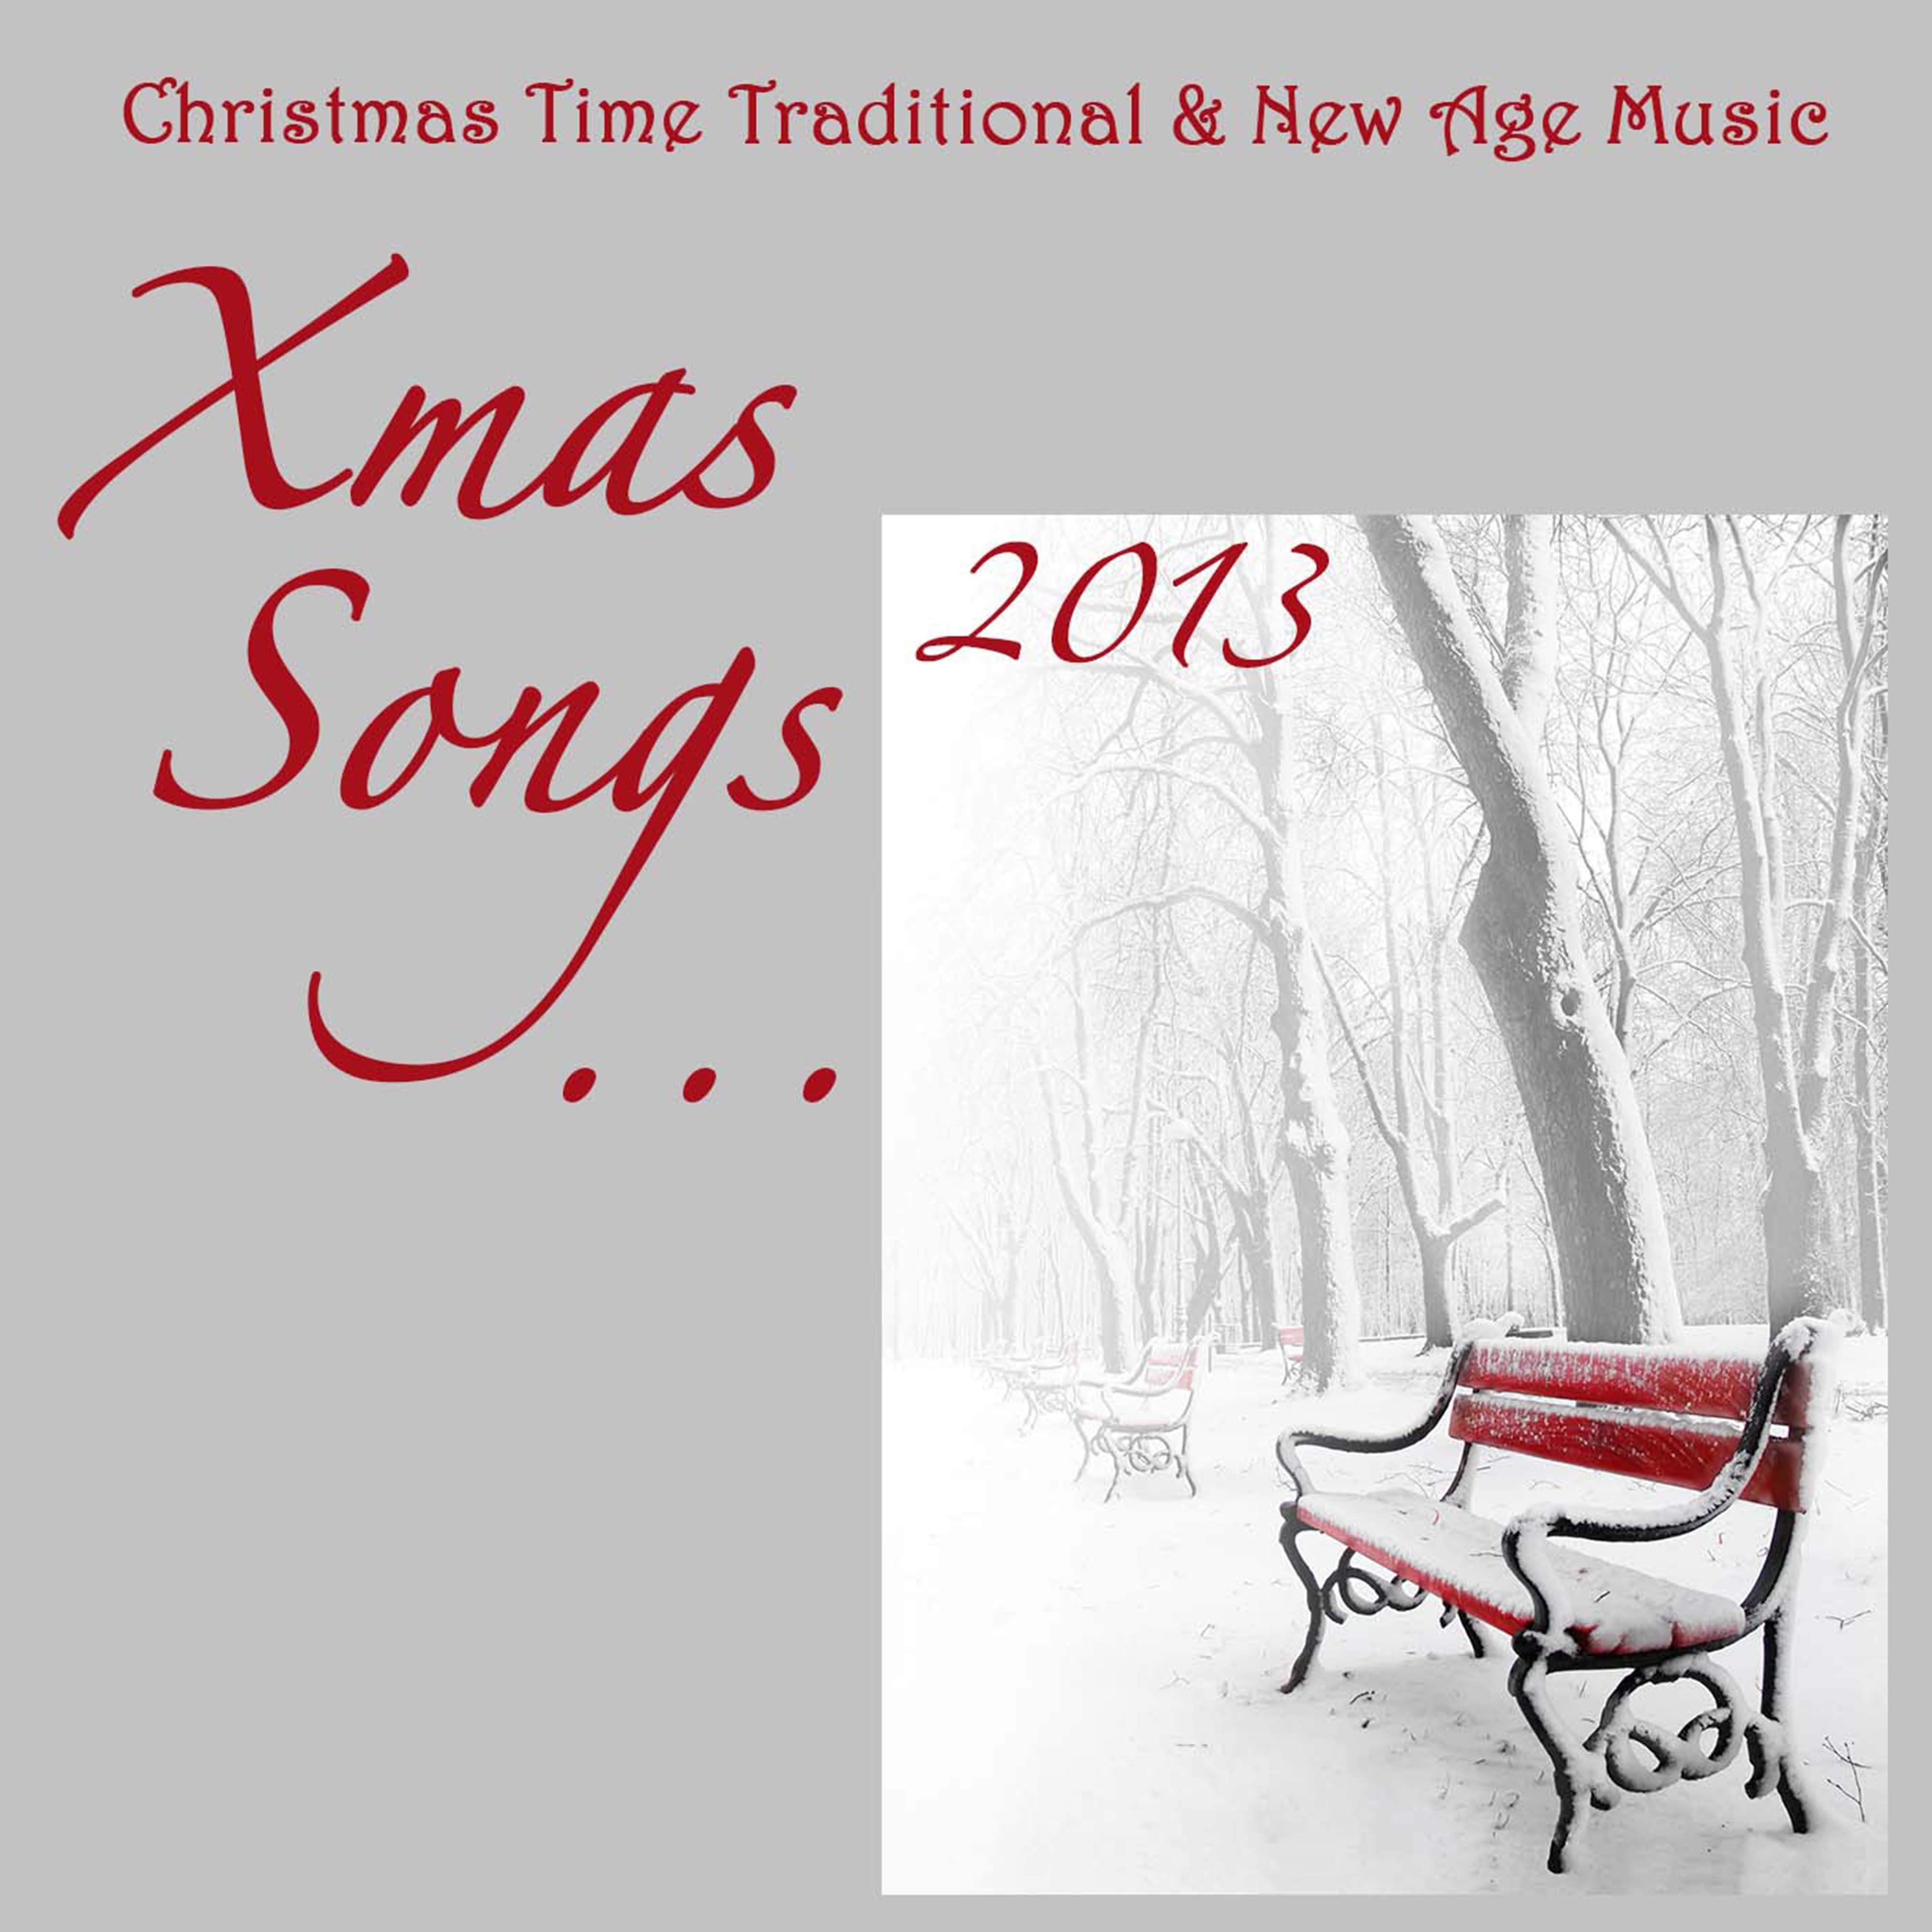 Xmas Songs 2013: Christmas Time Traditional and New Age Music for Family Reunion and Christmas Parties